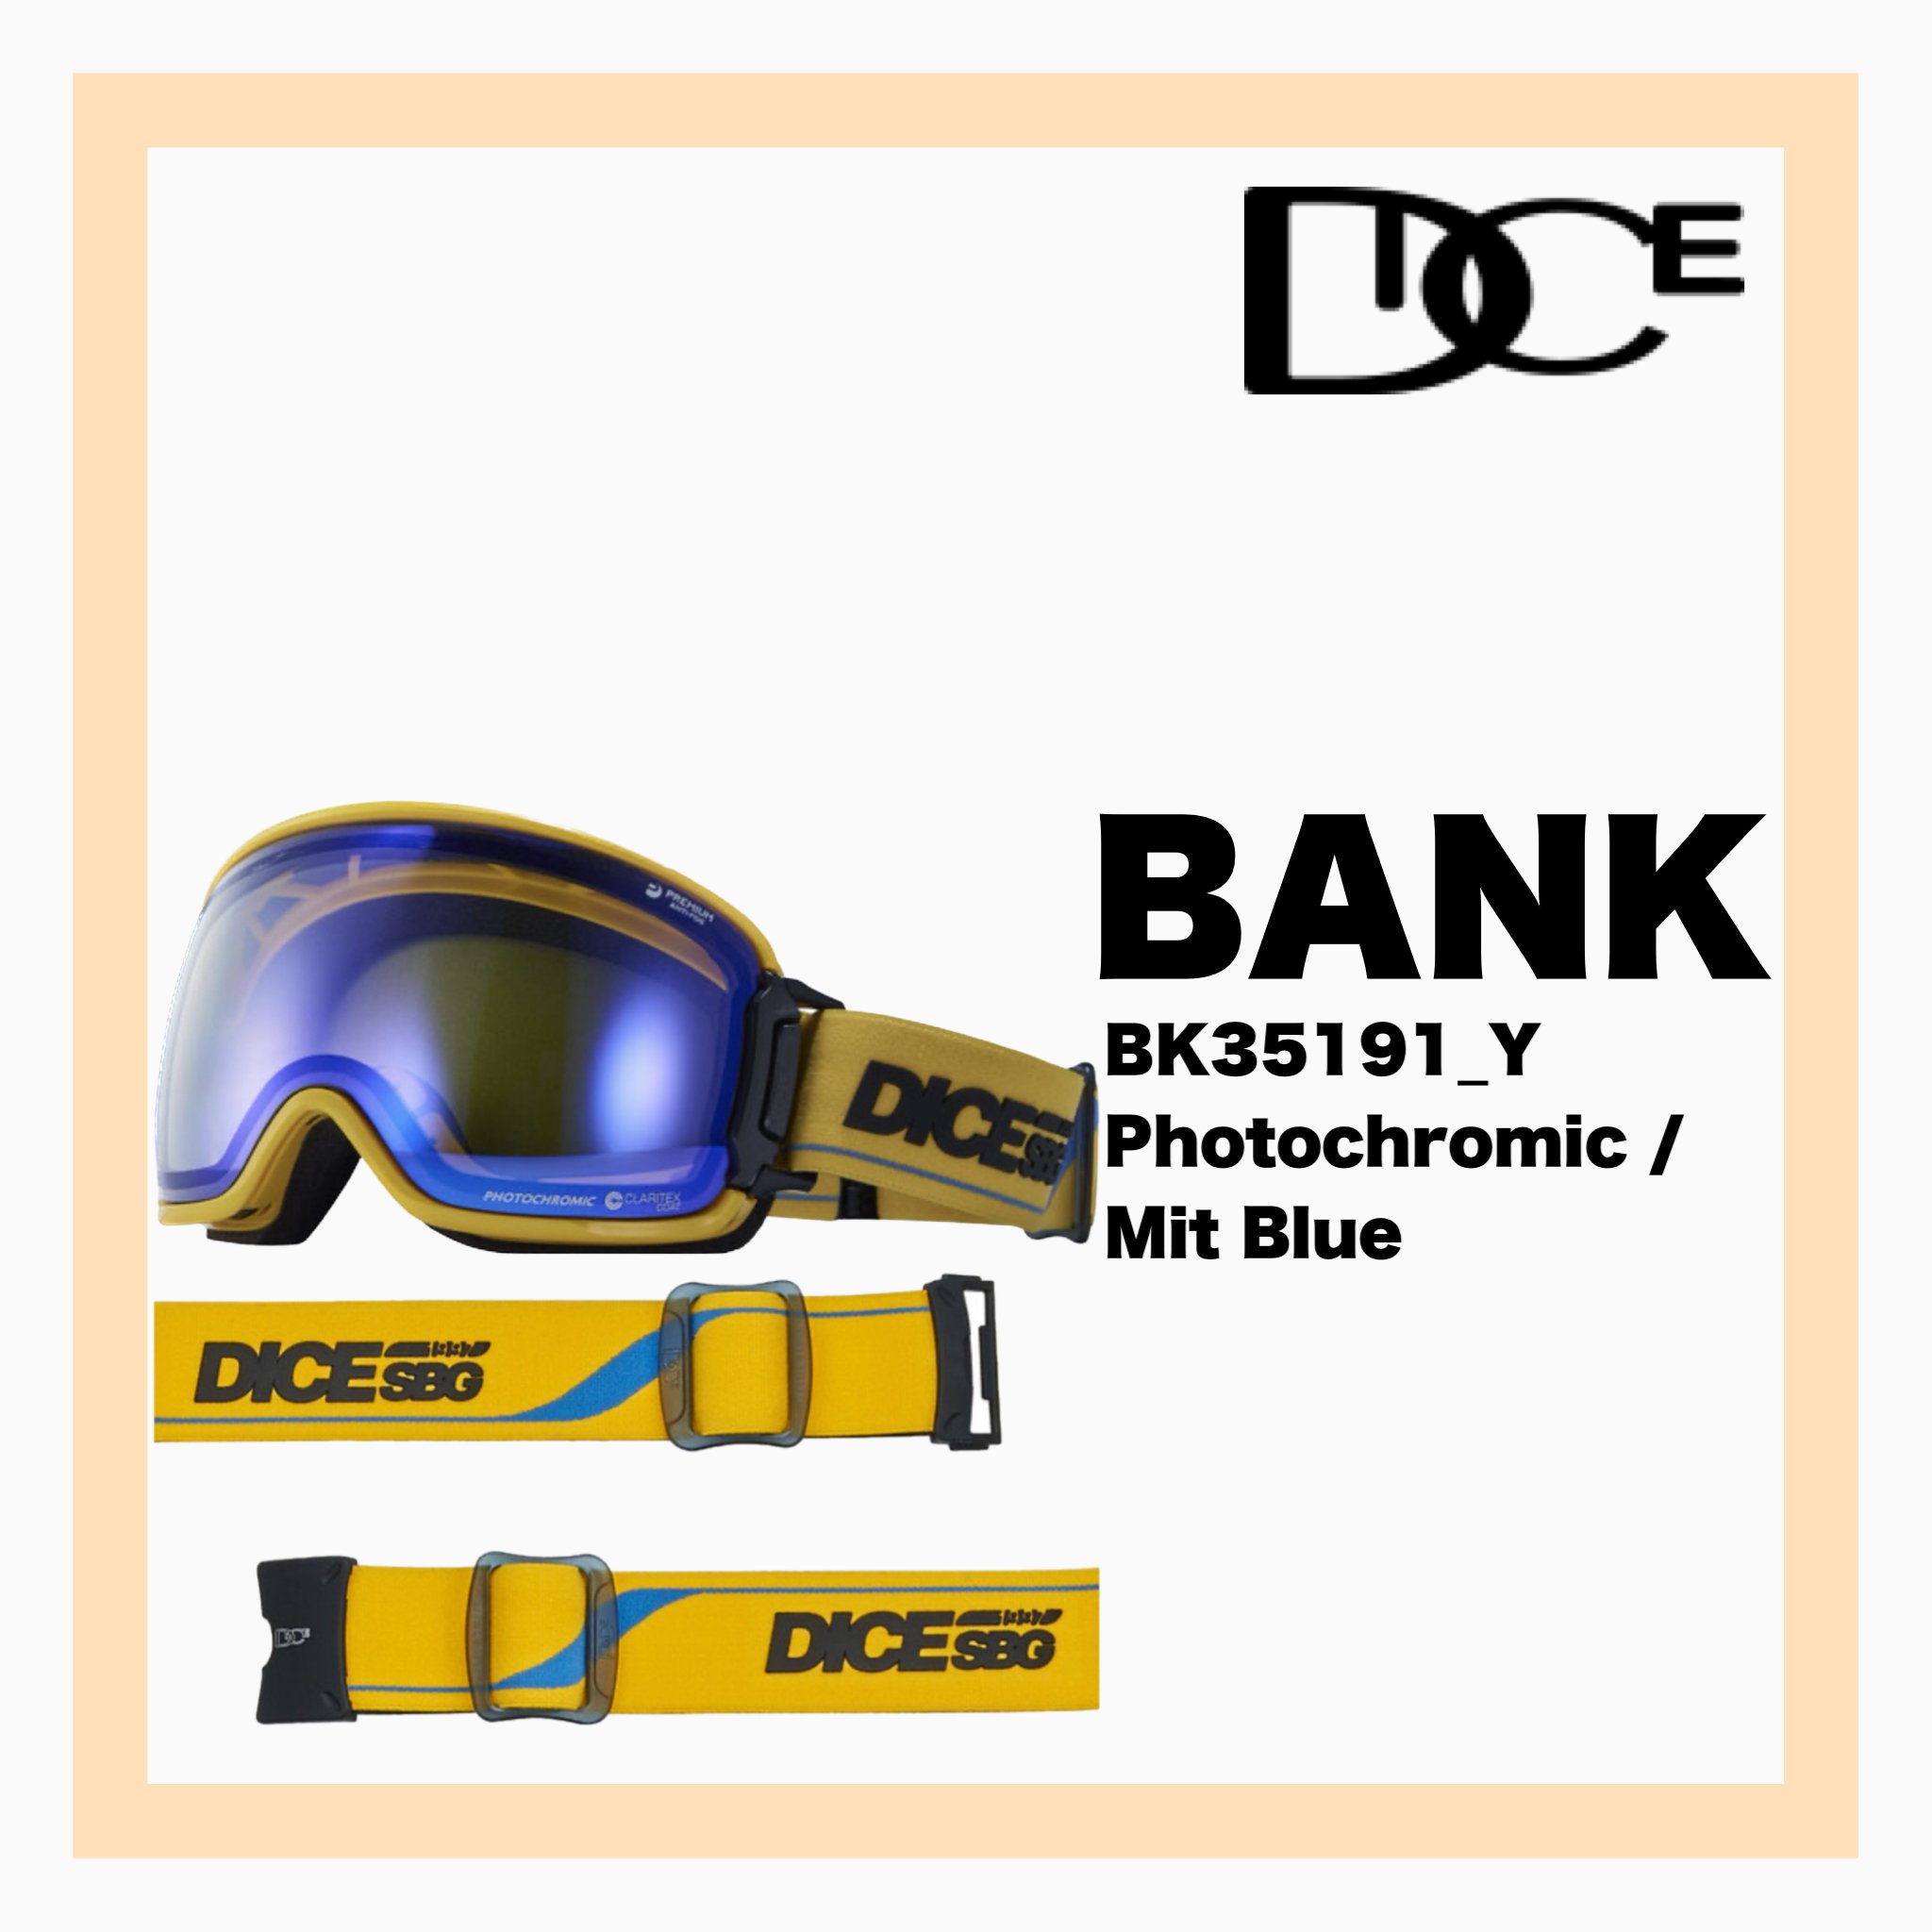 <img class='new_mark_img1' src='https://img.shop-pro.jp/img/new/icons43.gif' style='border:none;display:inline;margin:0px;padding:0px;width:auto;' />DICE BANK Y  Photochromic / Mit Blue